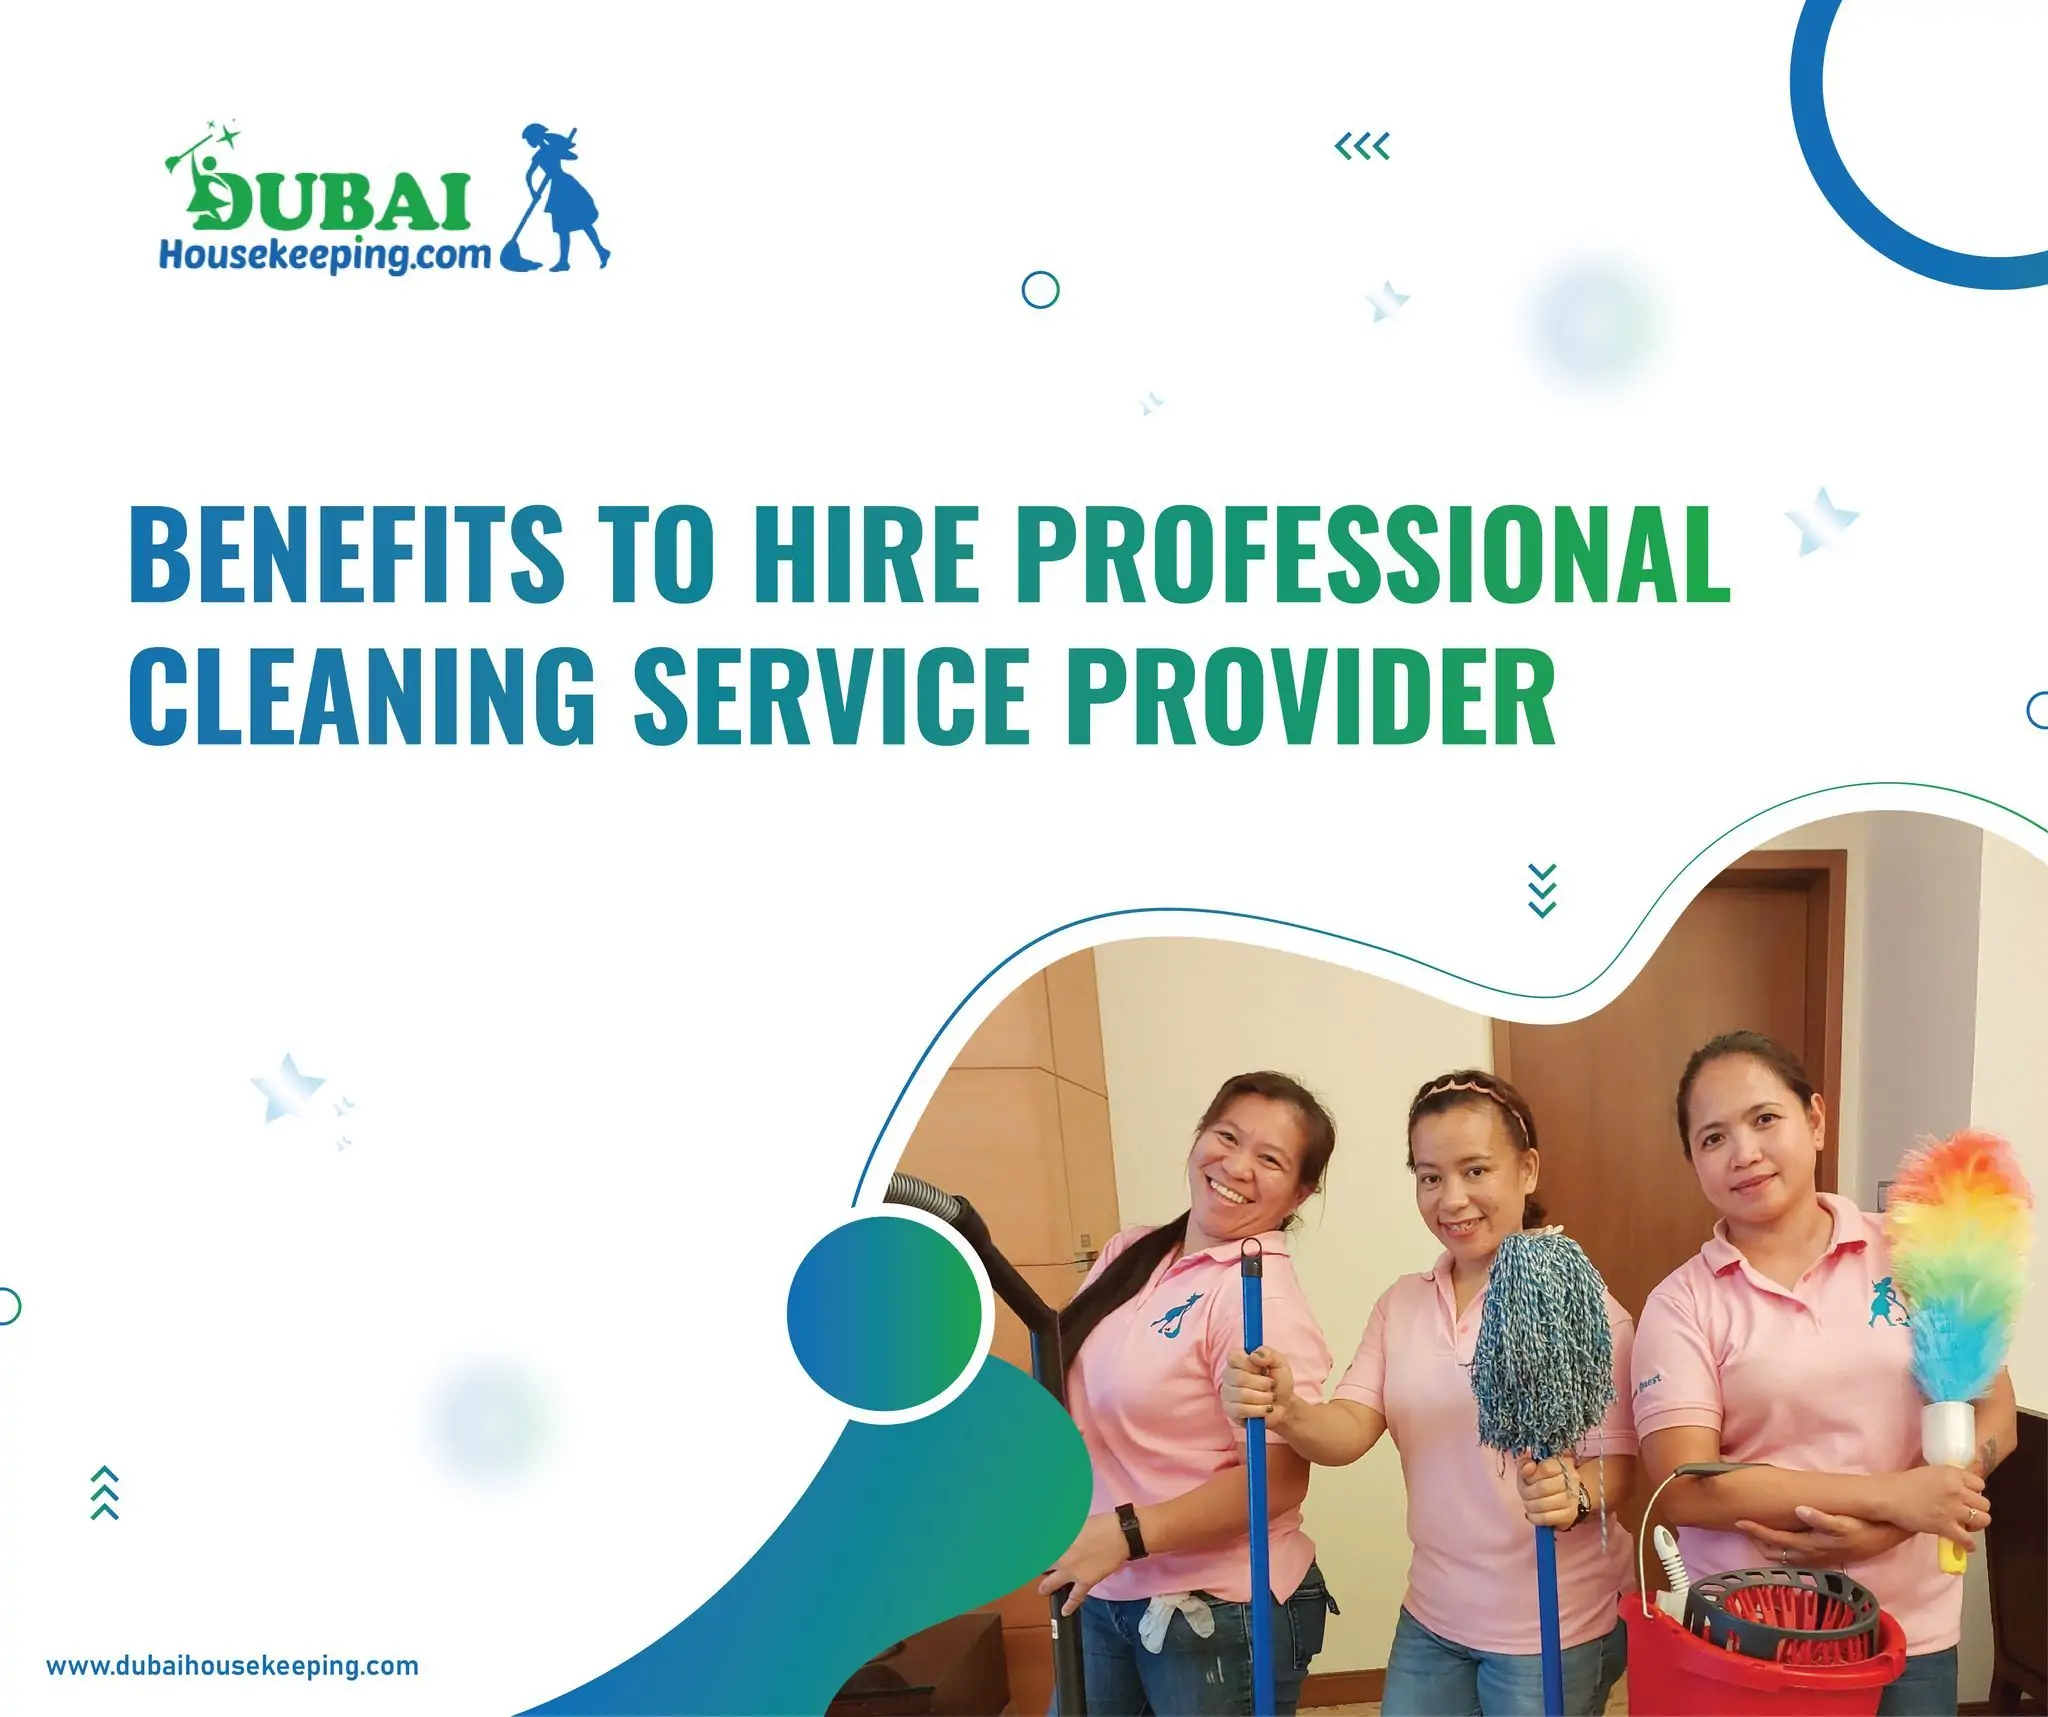 Benefits to Hire Professional Cleaning Service Provider